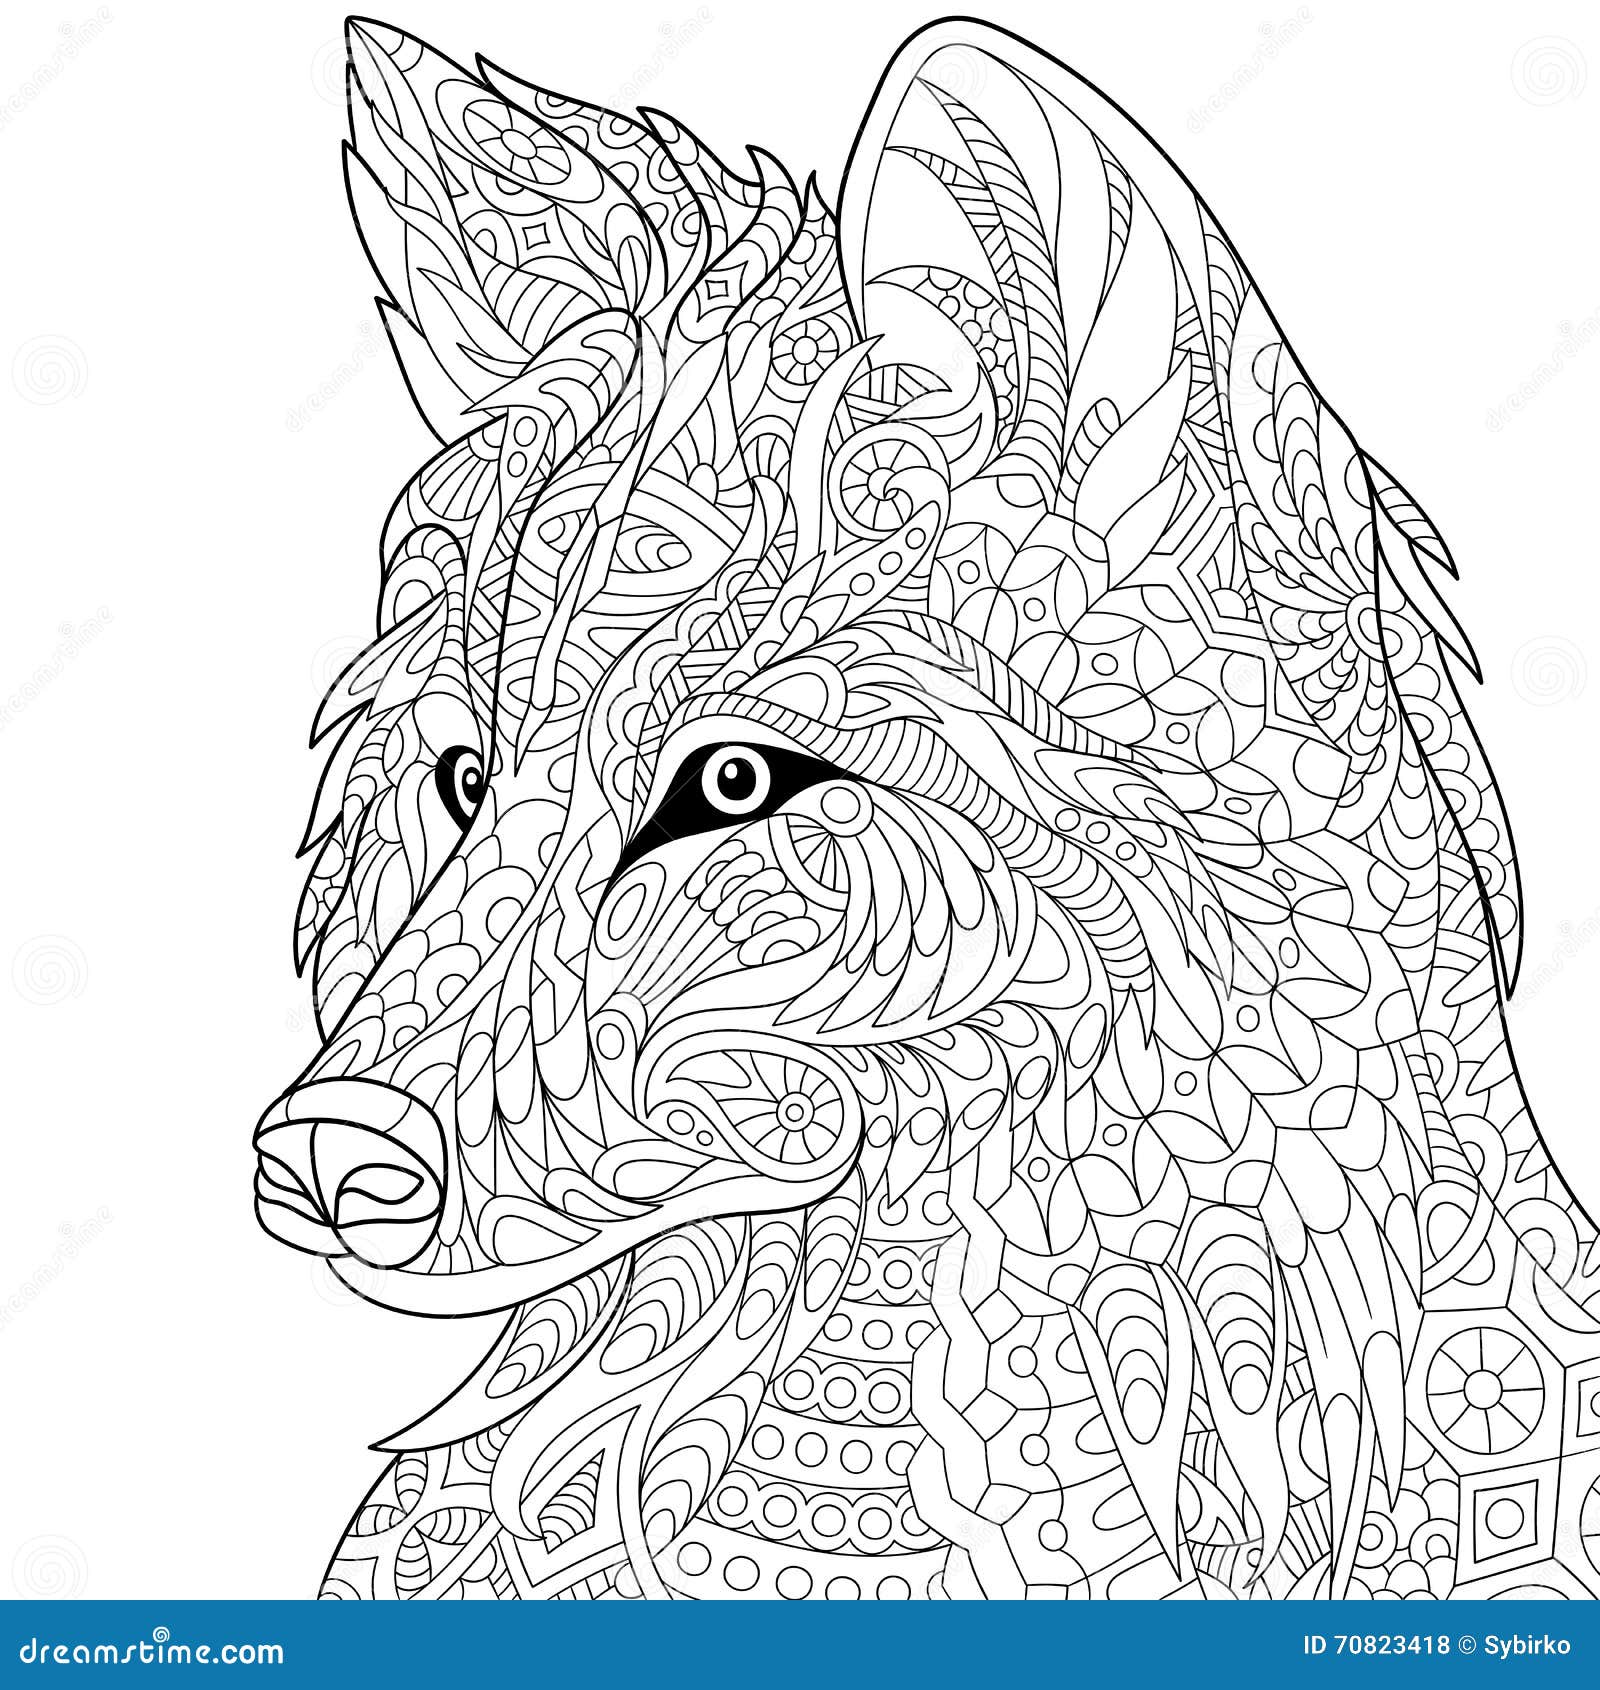 Wolf coloring stock illustrations â wolf coloring stock illustrations vectors clipart